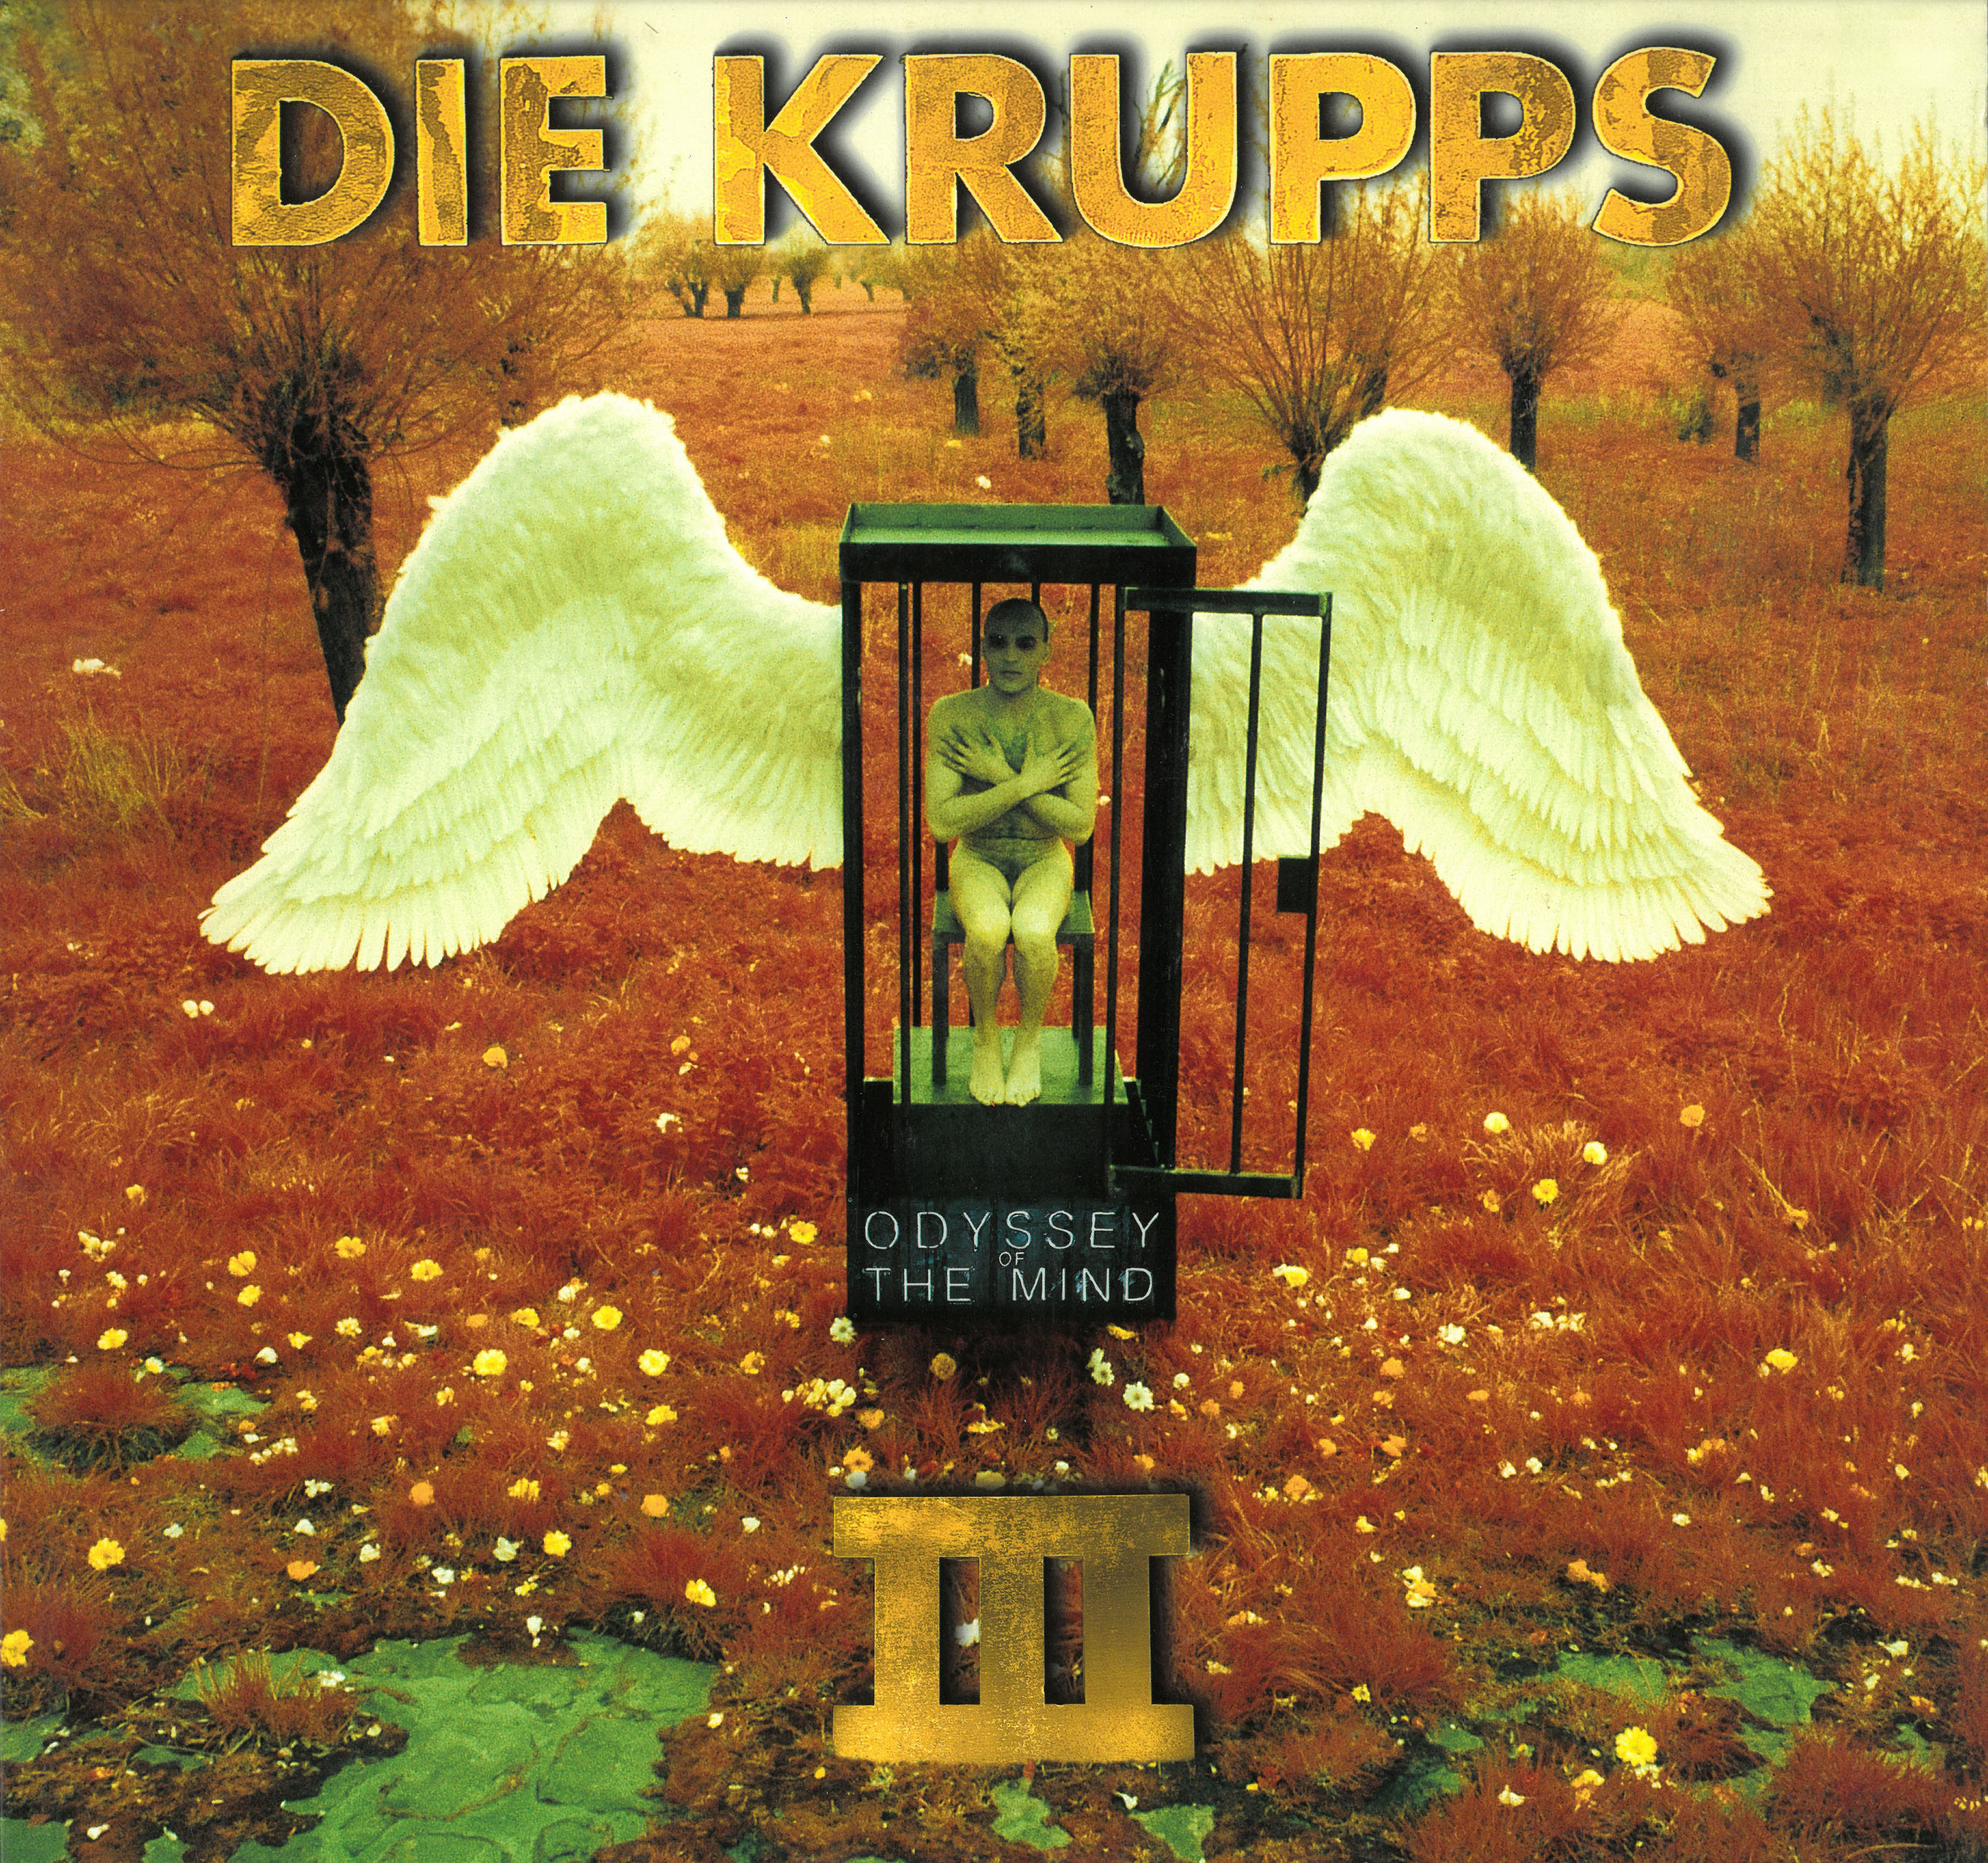 Krupps III - Odyssey Of The Mind LP 602436